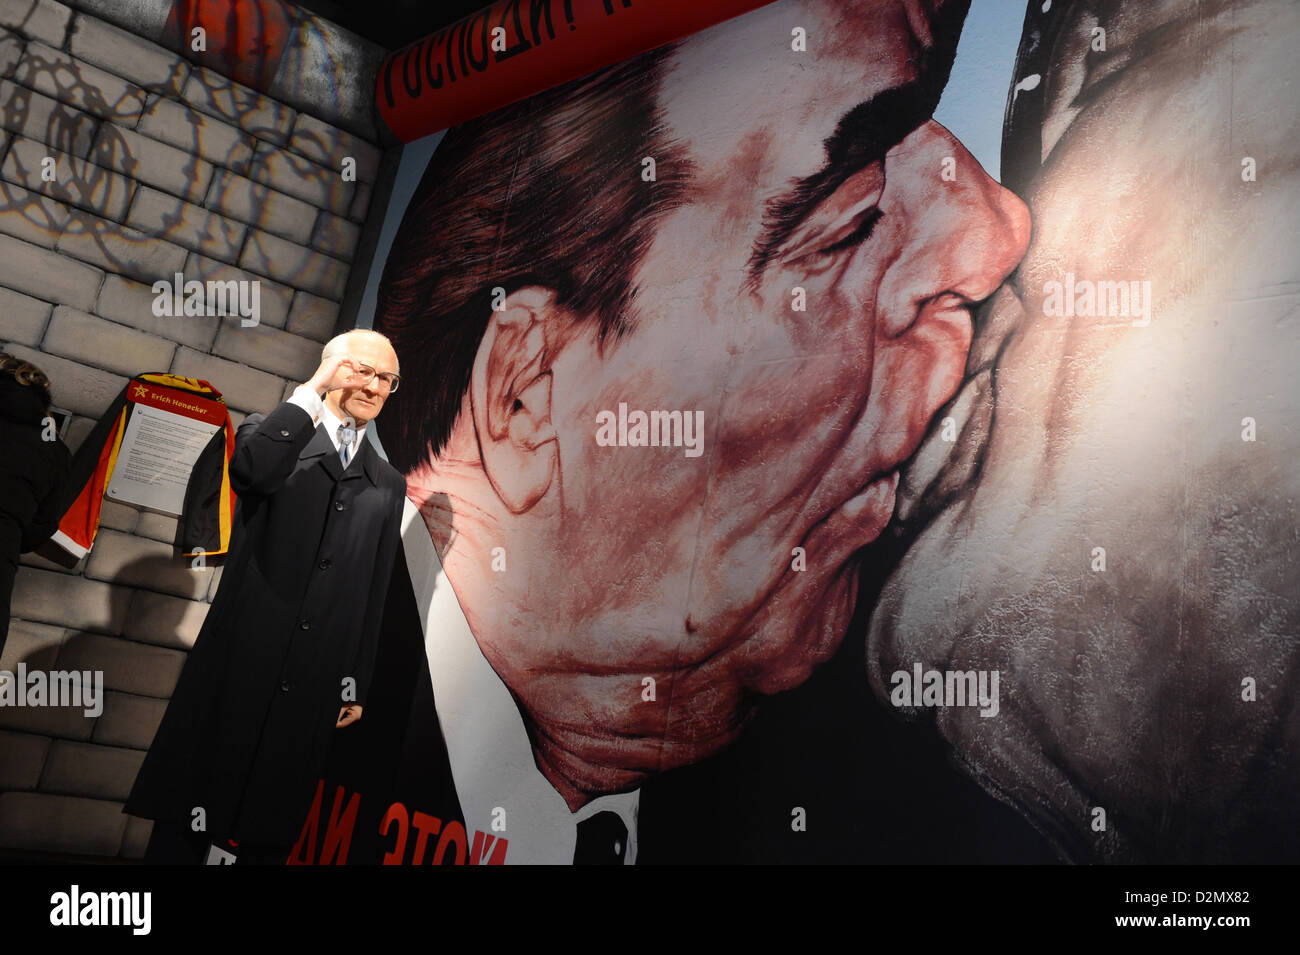 The wax figure depicting Erich Honecker, former Chairman of the State Council of the GDR, is pictured in front of the image showing the 'socialist fraternal kiss' of Honecker and Leonid Breschnew at the wax museum Madame Tussauds in Berlin, Germany, 04 December 2012. Photo: Jens Kalaene Stock Photo